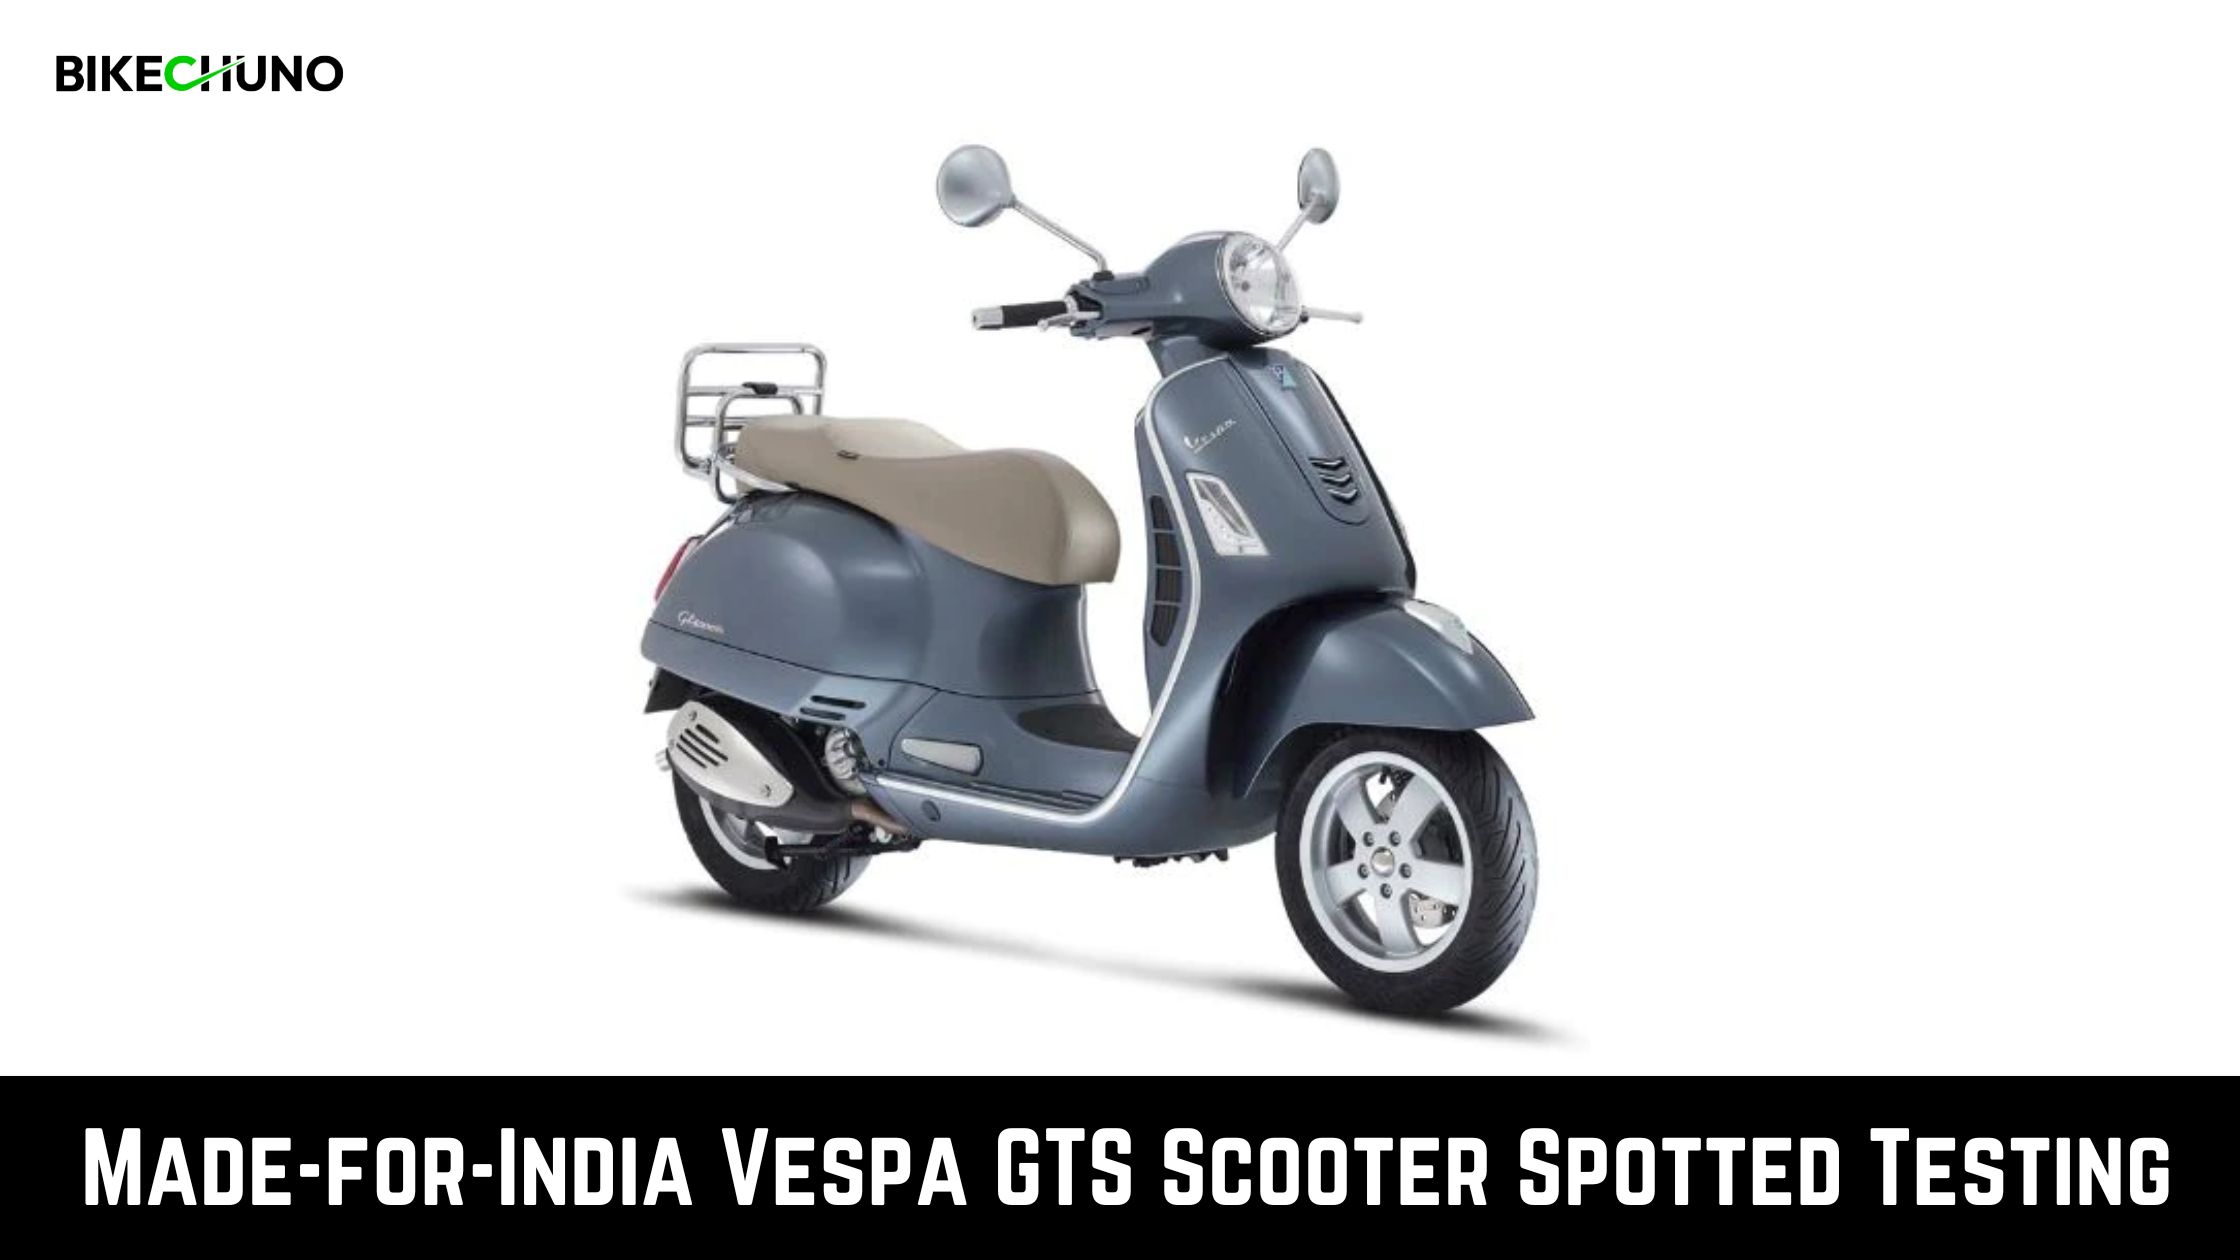 Made-for-India Vespa GTS Scooter Spotted Testing